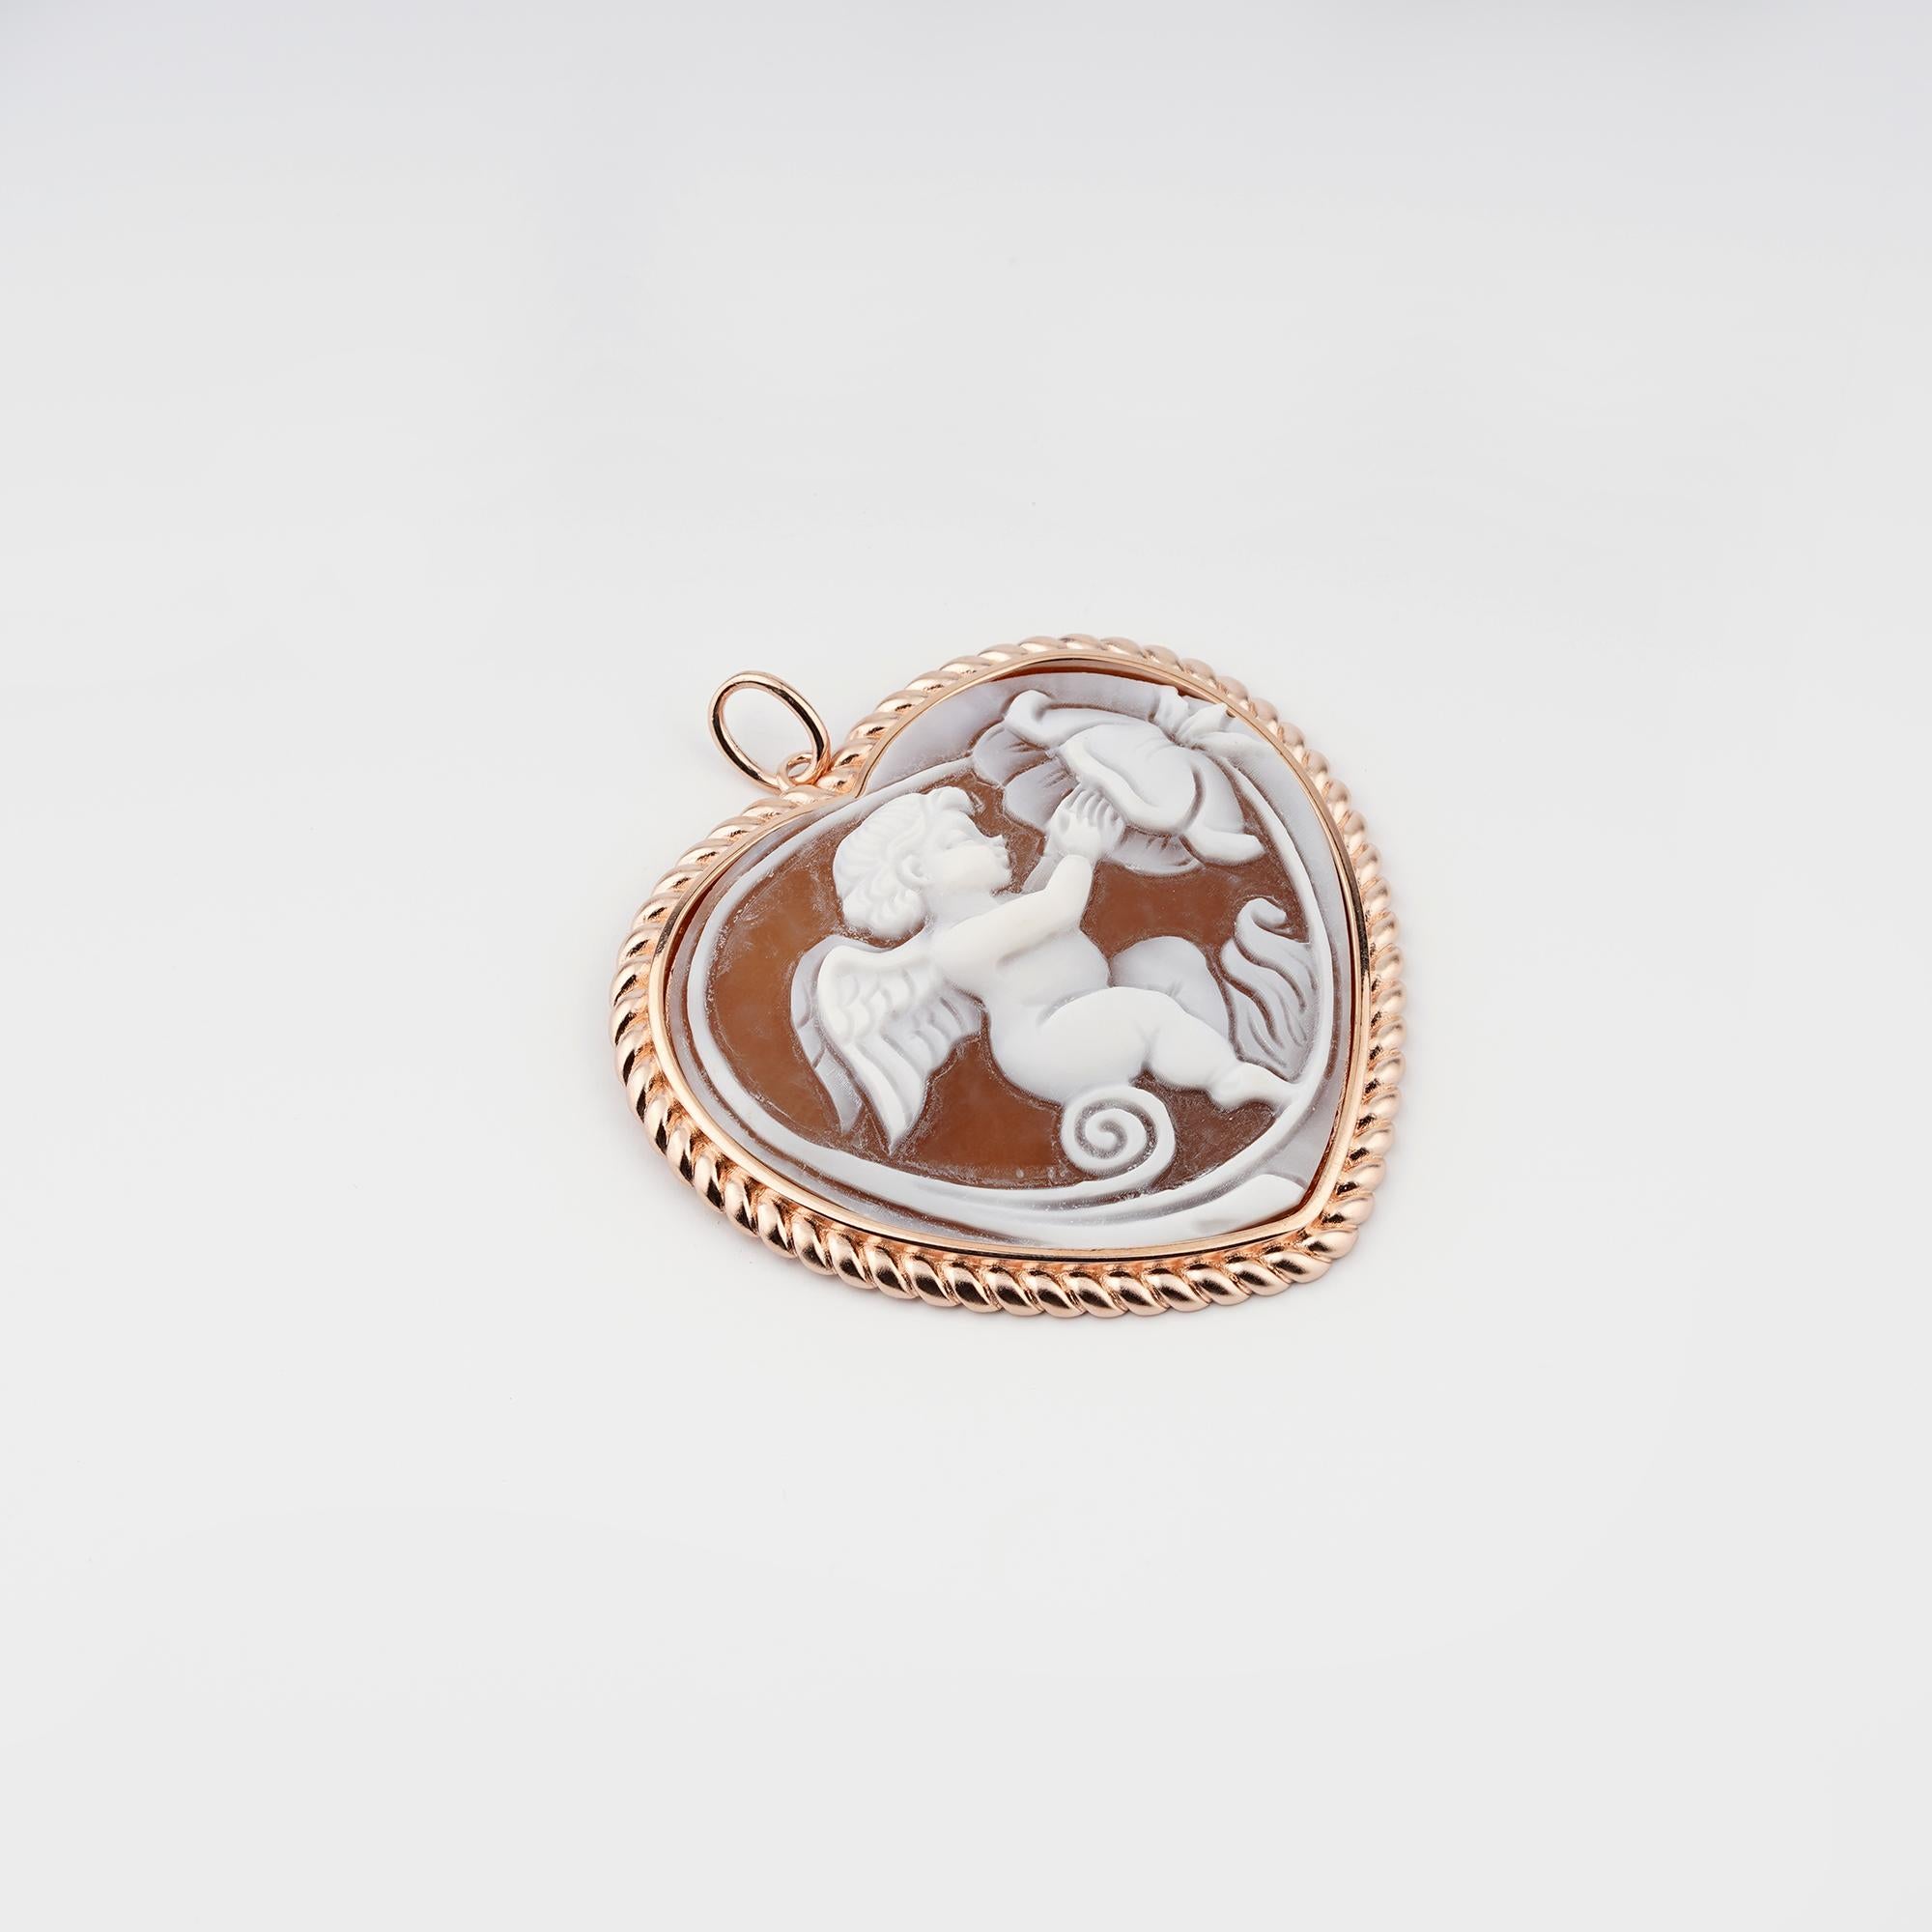 This romantic Heart pendant featuring the Cherub is an outstanding piece of jewelry perfect for the  made in Italy passionates.
Its hand-carved  sea shell cammeo mounted in 18ct rose gold plated Silver is a work of art made by our Master artisans